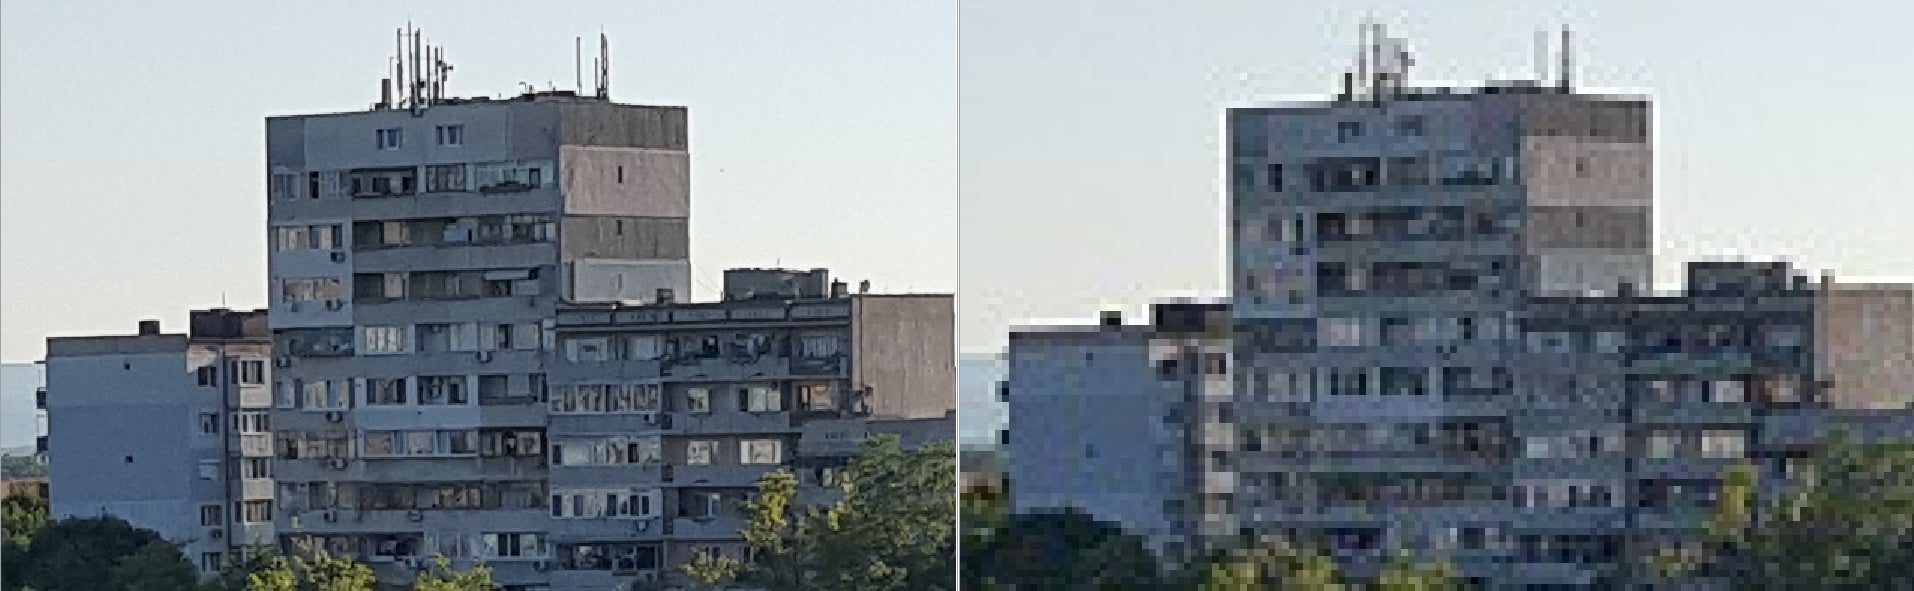 Original, full-sized image crop (left); same image uploaded to Instagram (right). Click to explore properly. - Here's why your camera's megapixel count is less important than you think